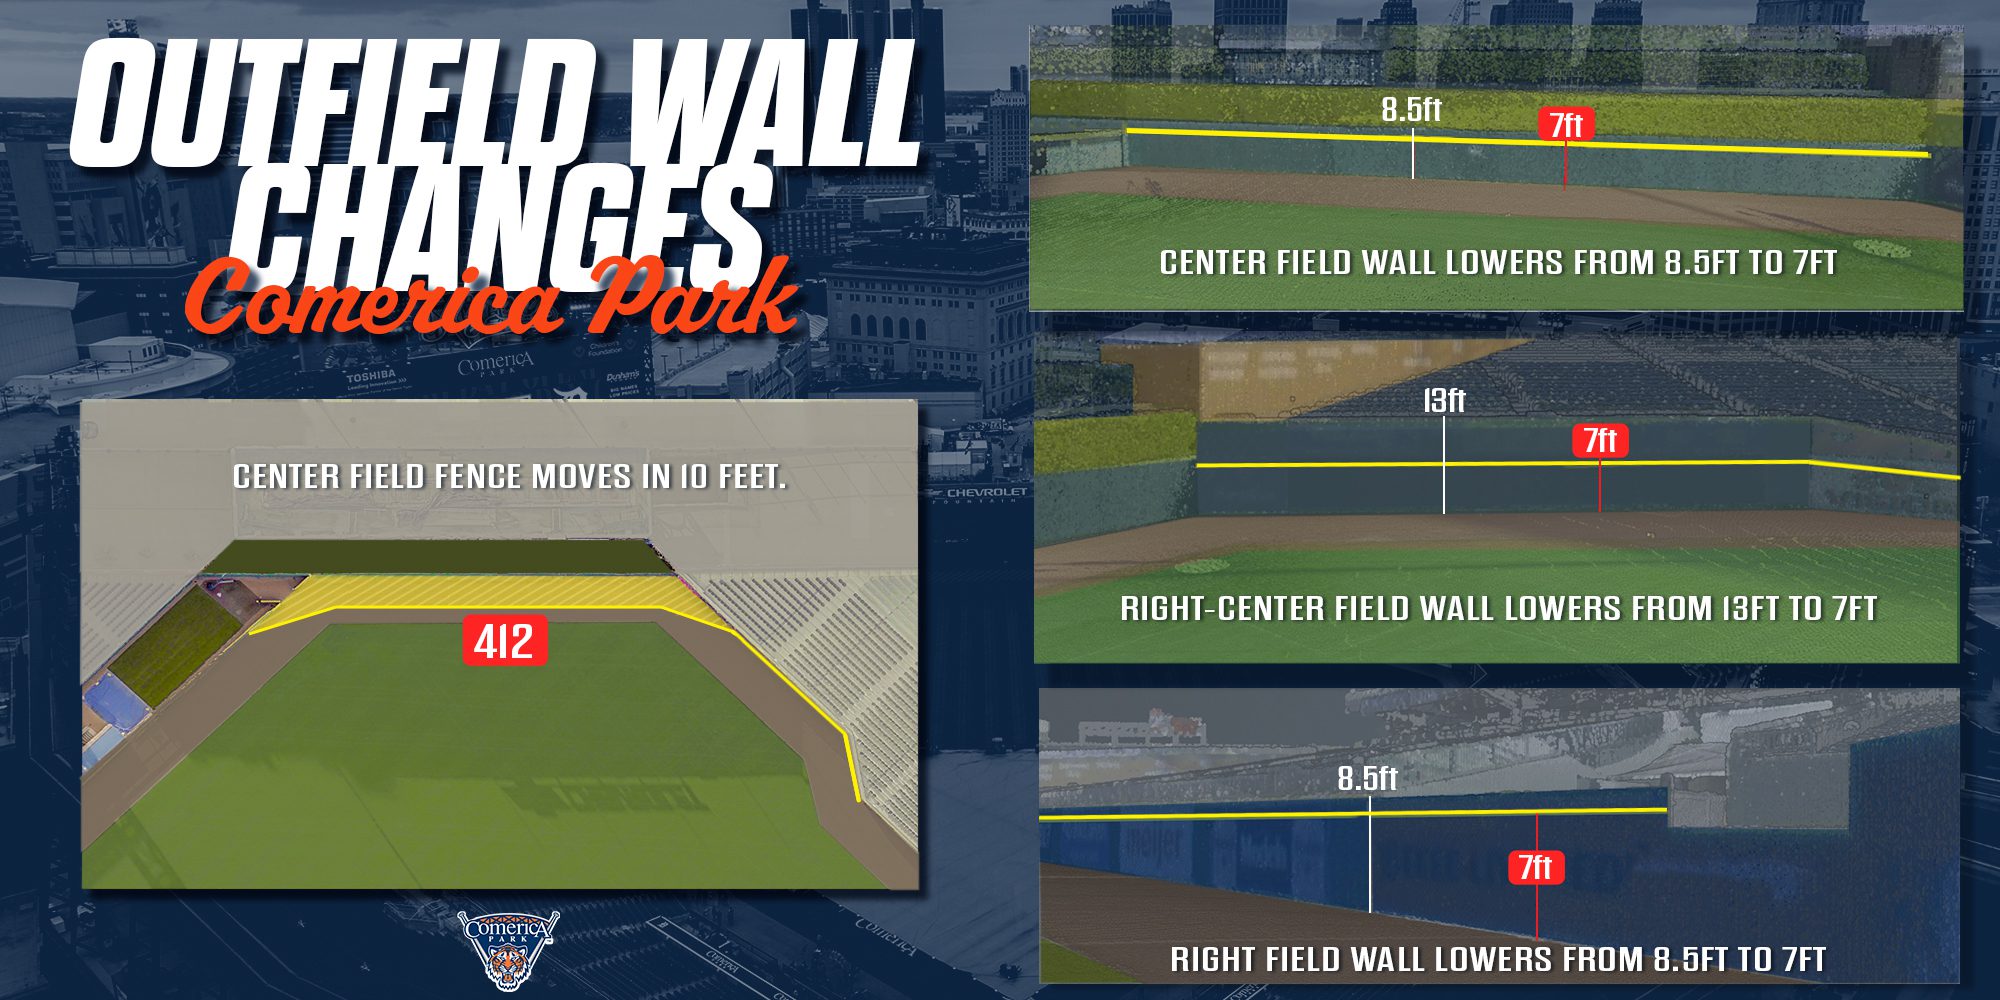 Tigers announce new Comerica Park outfield dimensions - Ballpark Digest